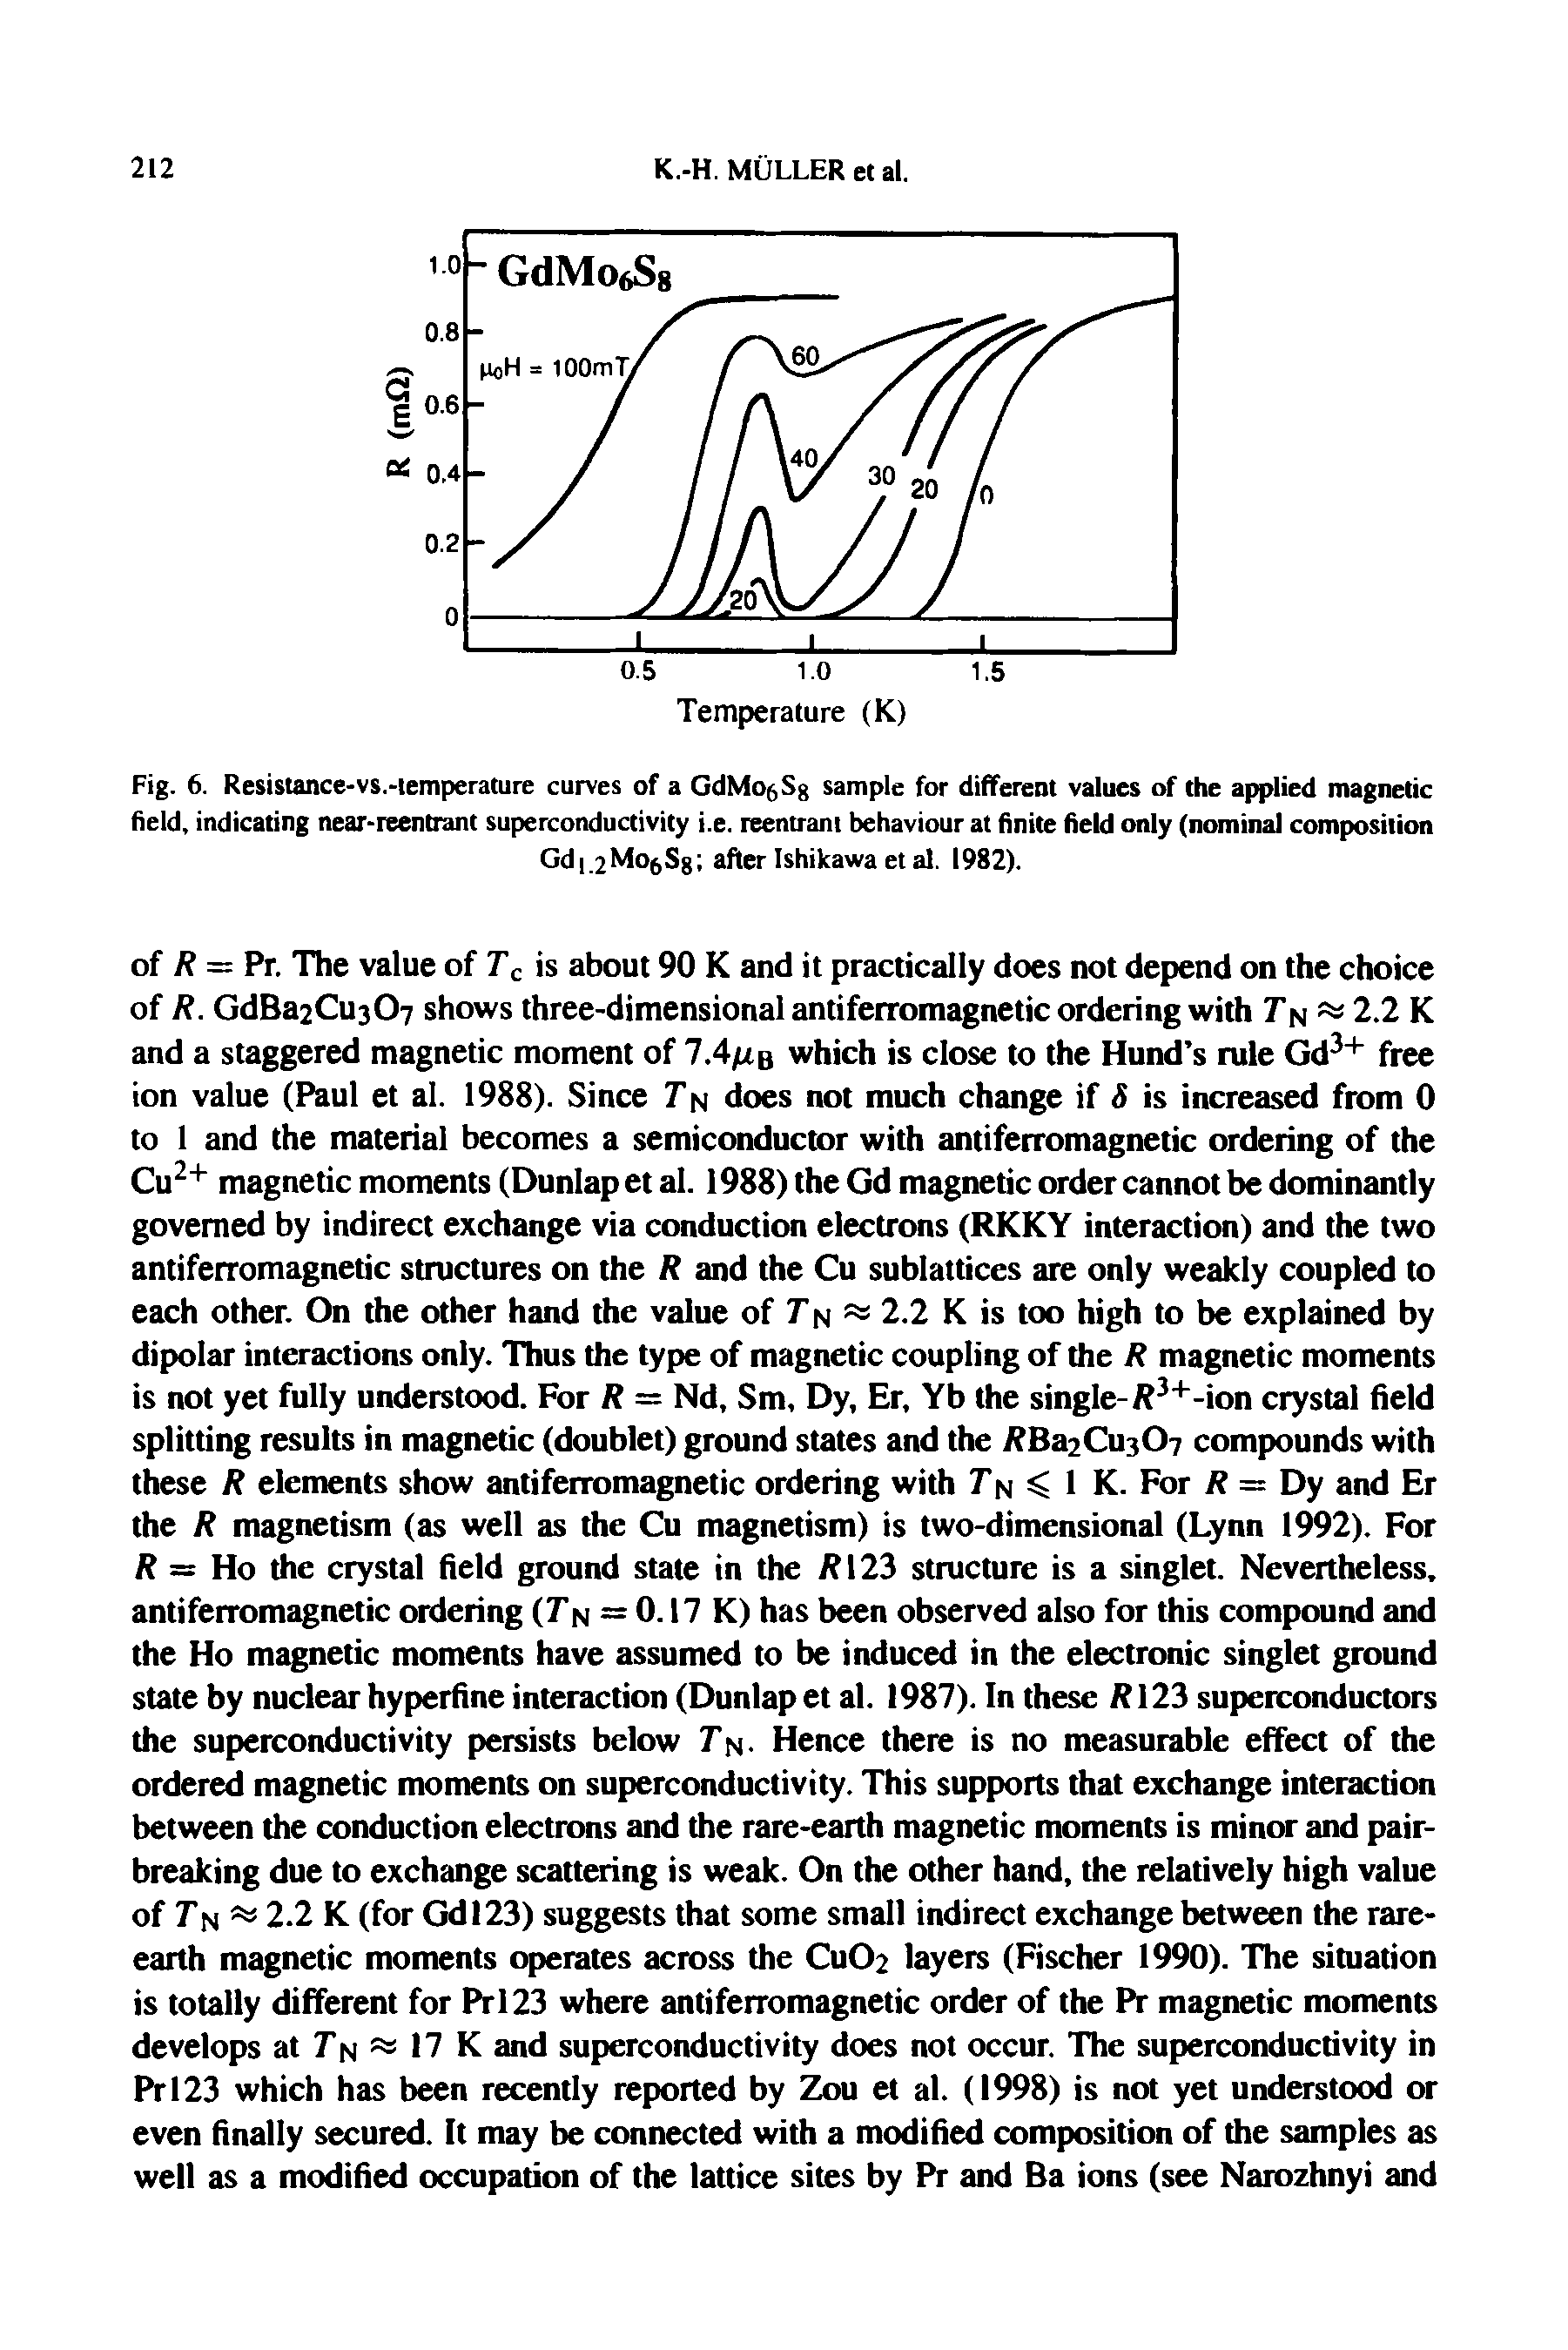 Fig. 6. Resistance-vs.-temperature curves of a GdMO(,Sg sample for different values of the applied magnetic field, indicating near-reentrant superconductivity i.e. reentrant behaviour at finite field only (nominal composition...